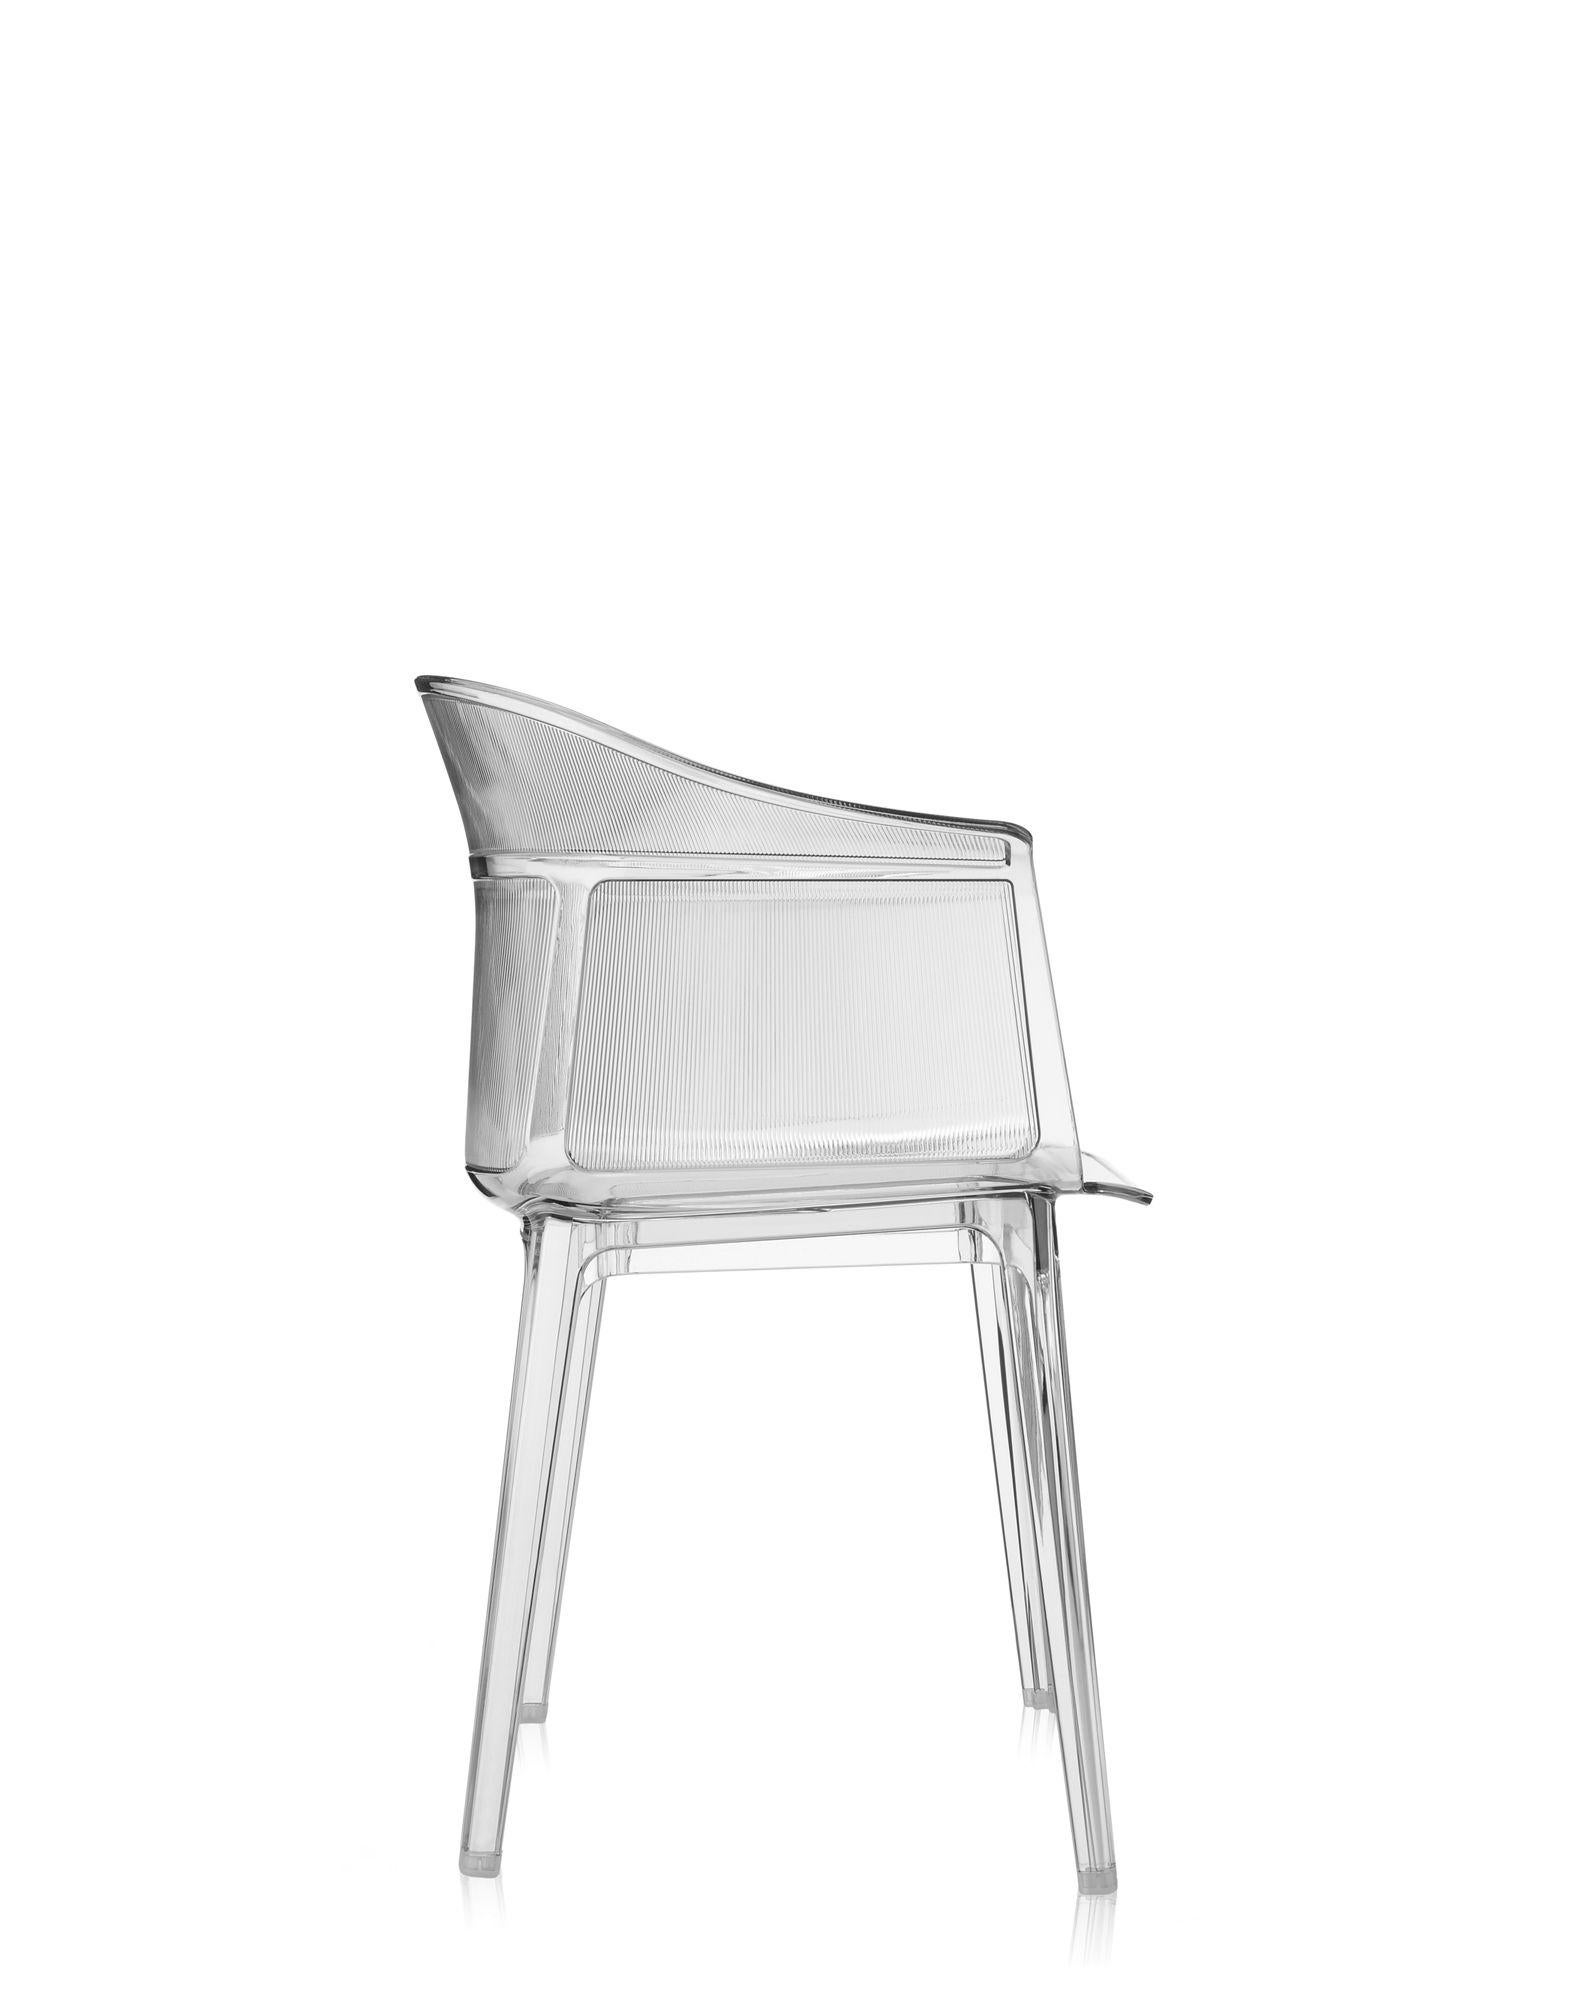 Italian Set of 2 Kartell Papyrus Chair in Crystal by Ronan & Erwan Bouroullec For Sale